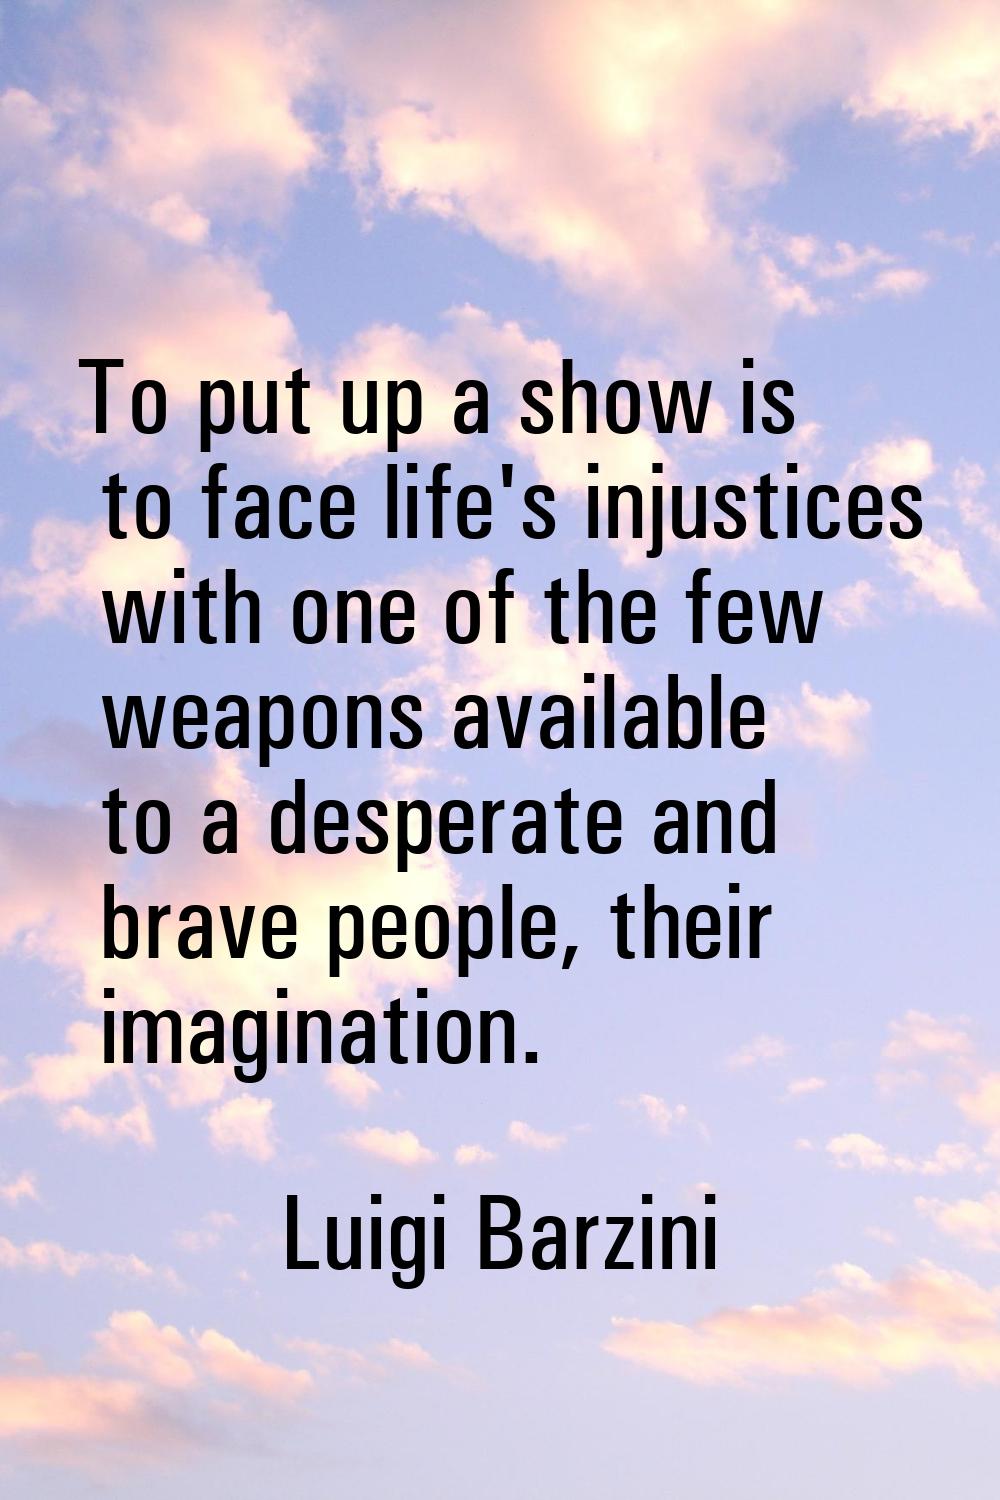 To put up a show is to face life's injustices with one of the few weapons available to a desperate 